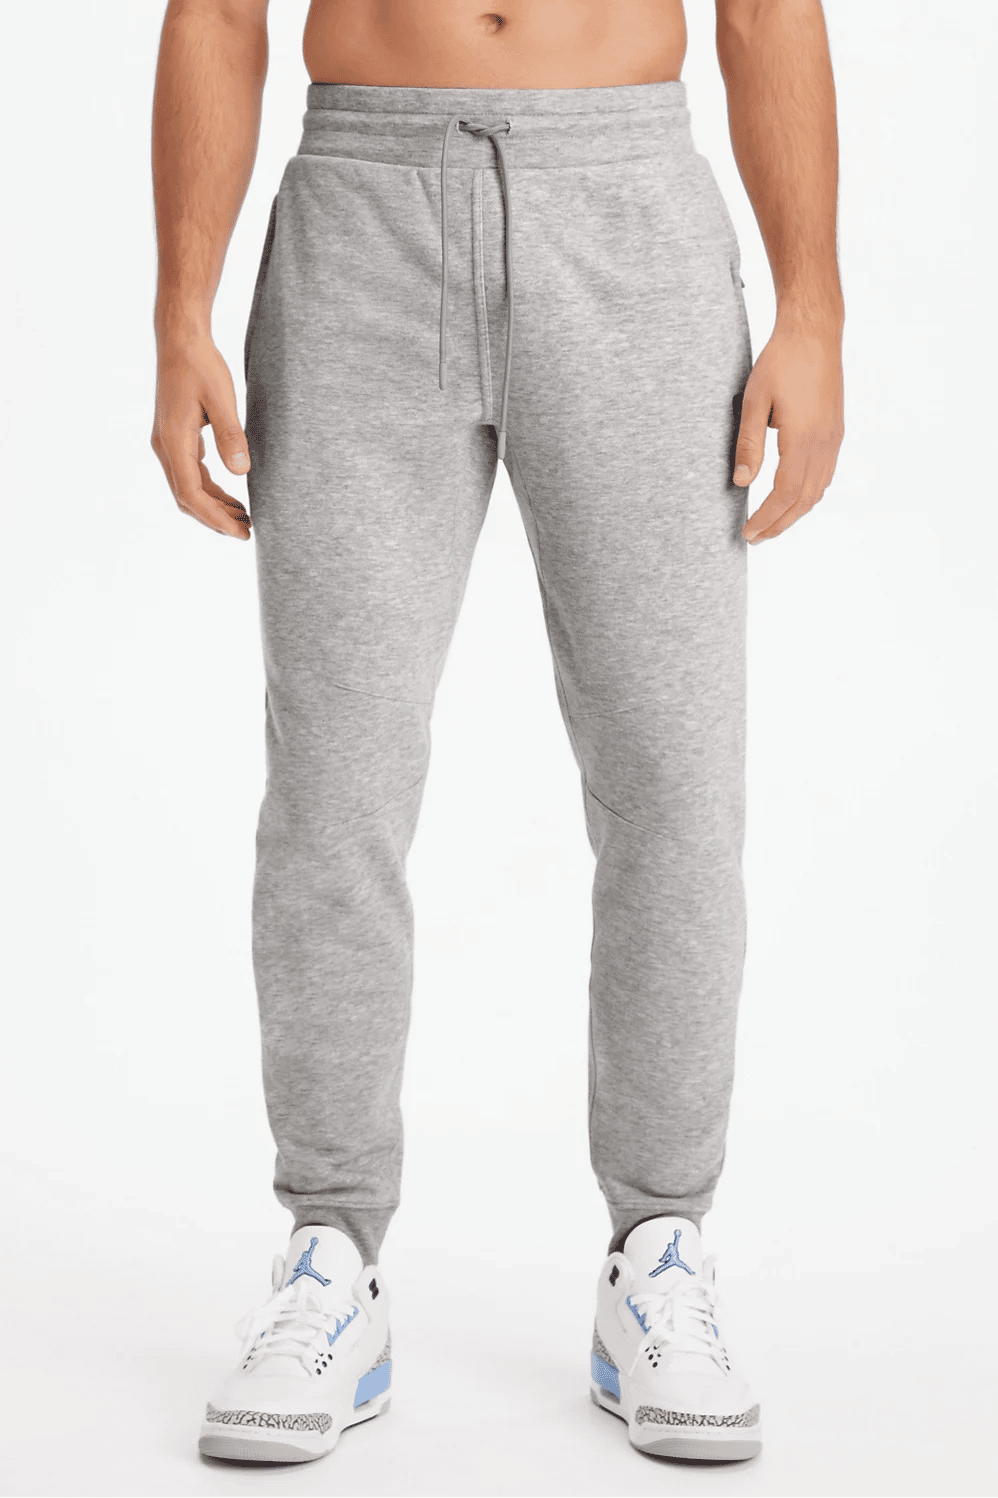 41 Best Sweatpants for Men to Wear in 2023 According to Style Experts